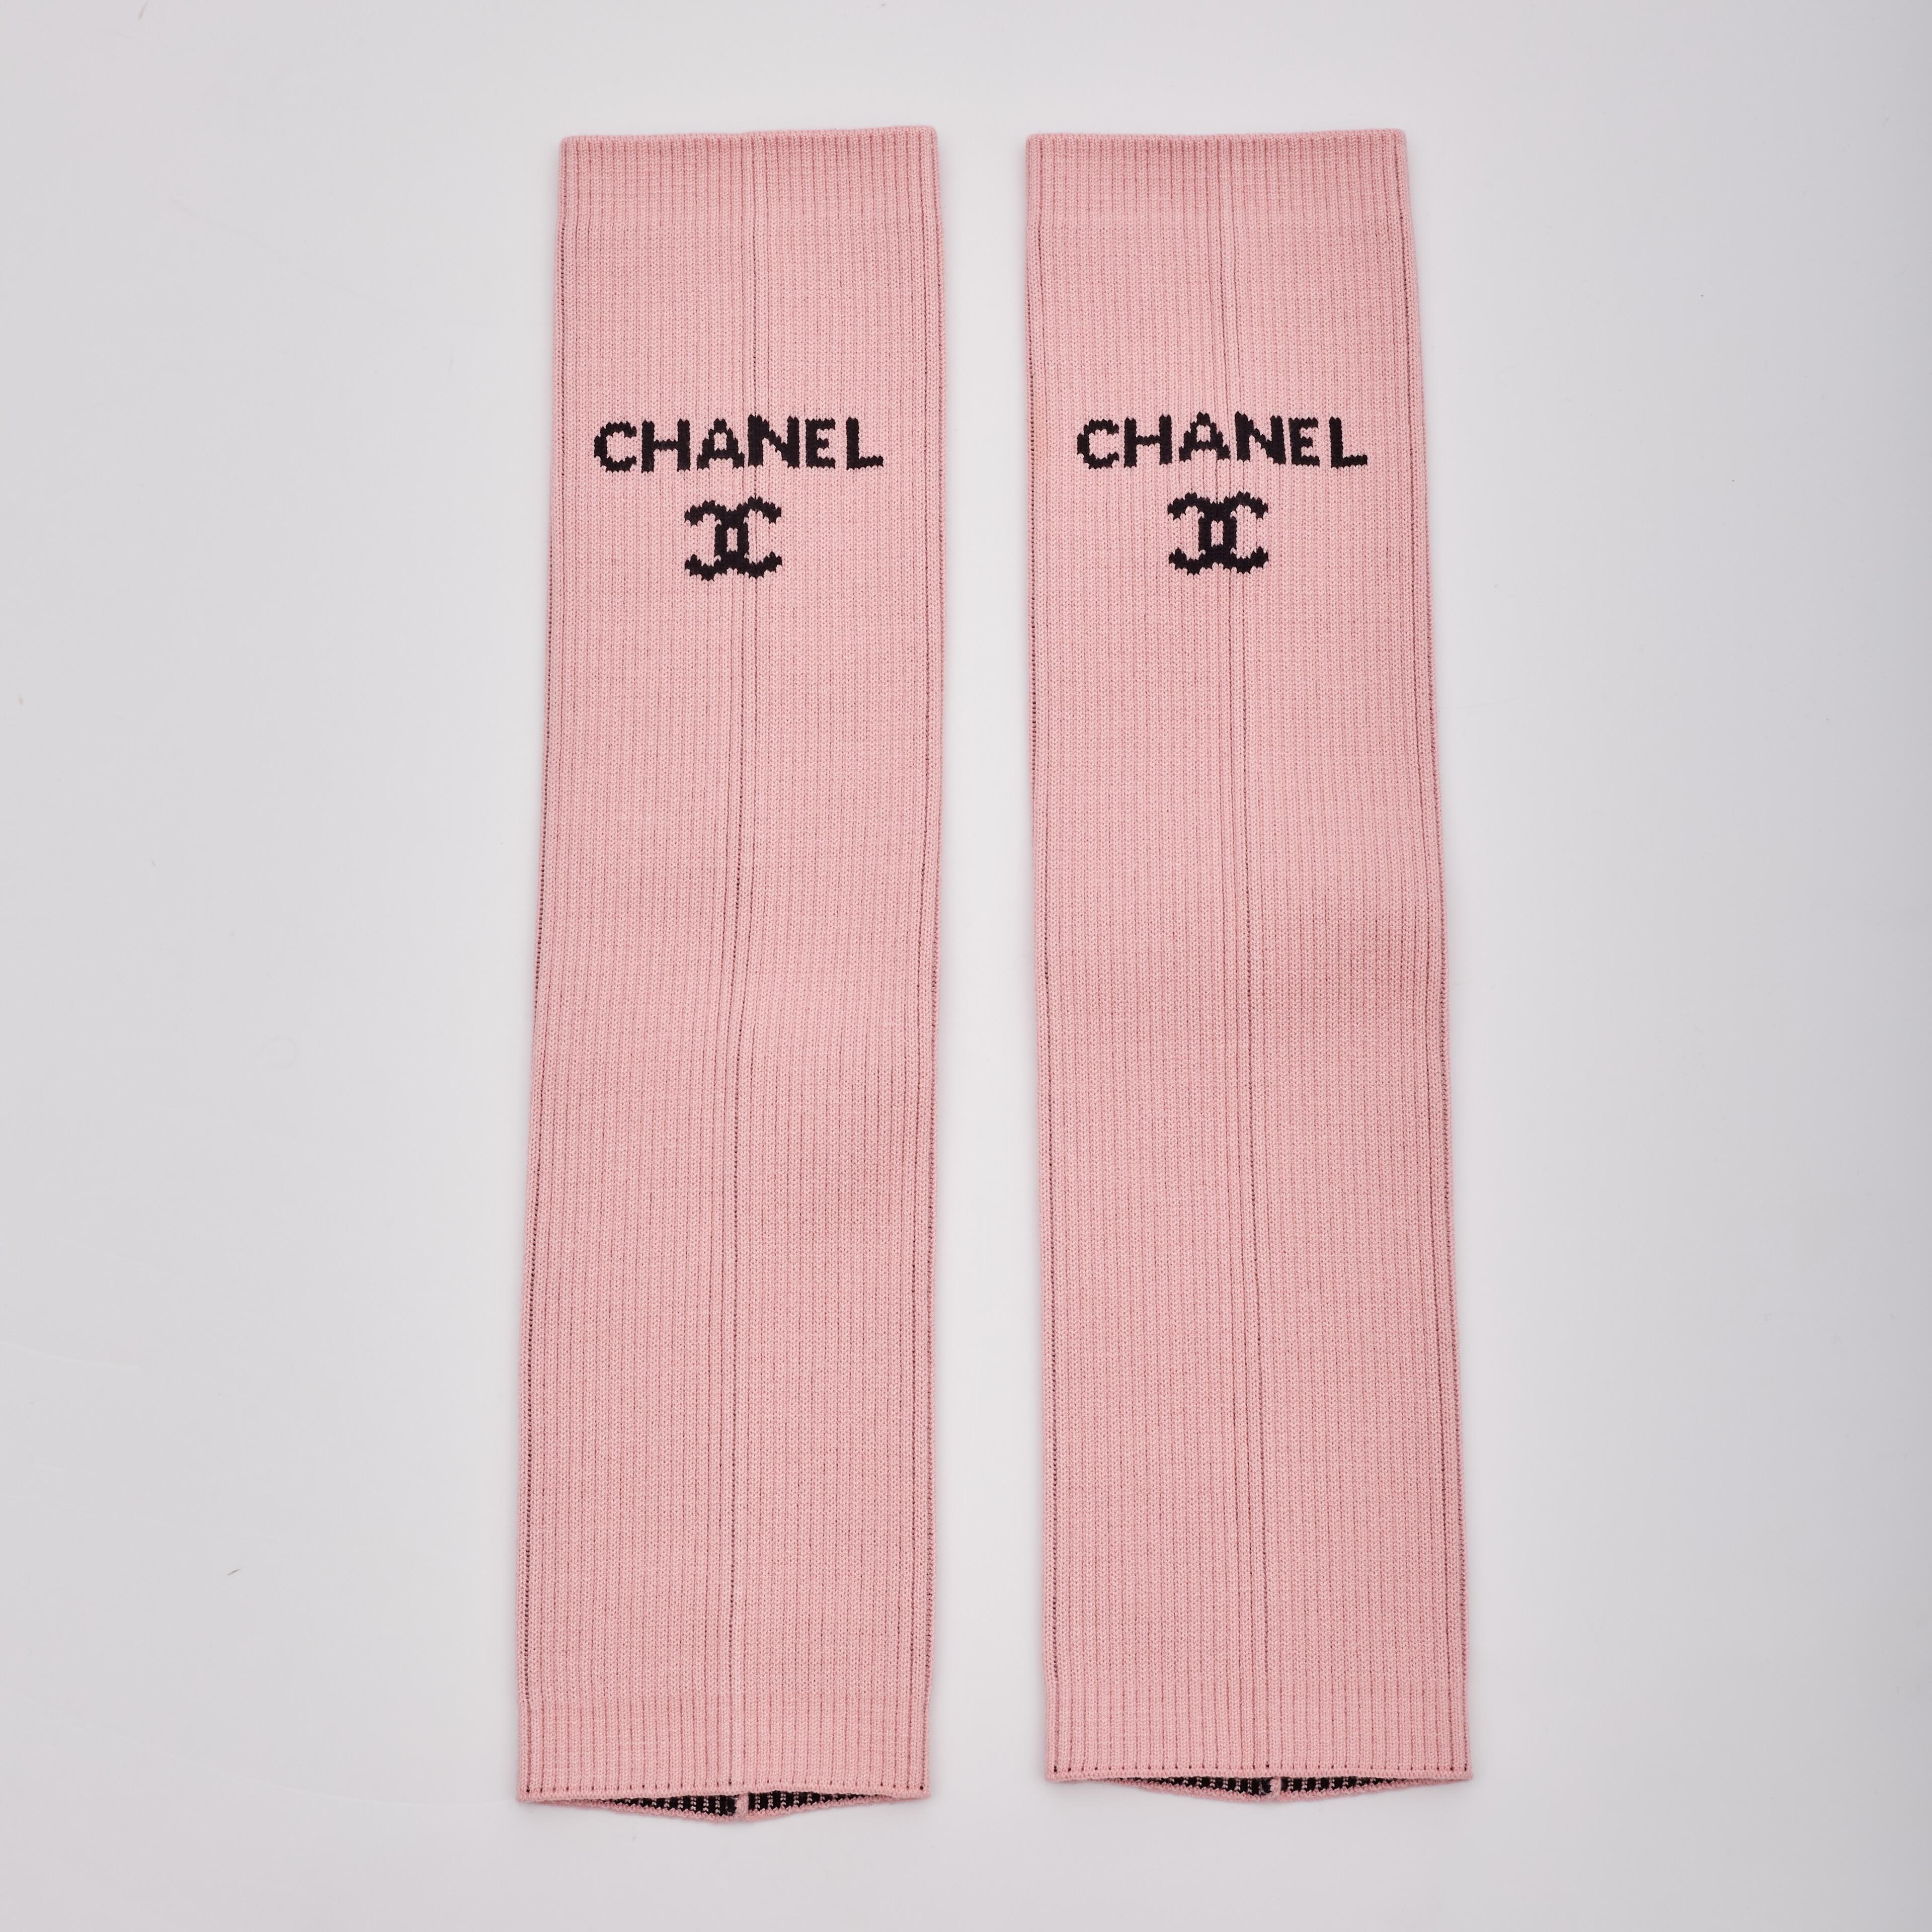 Introducing the sought-after knit Chanel Leg Warmers in pink, part of the limited-production collection from Chanel's 2024 Cruise line. This piece was featured in the LA Hollywood Cruise runway fashion show, specifically in Looks 26, 29, 30, and